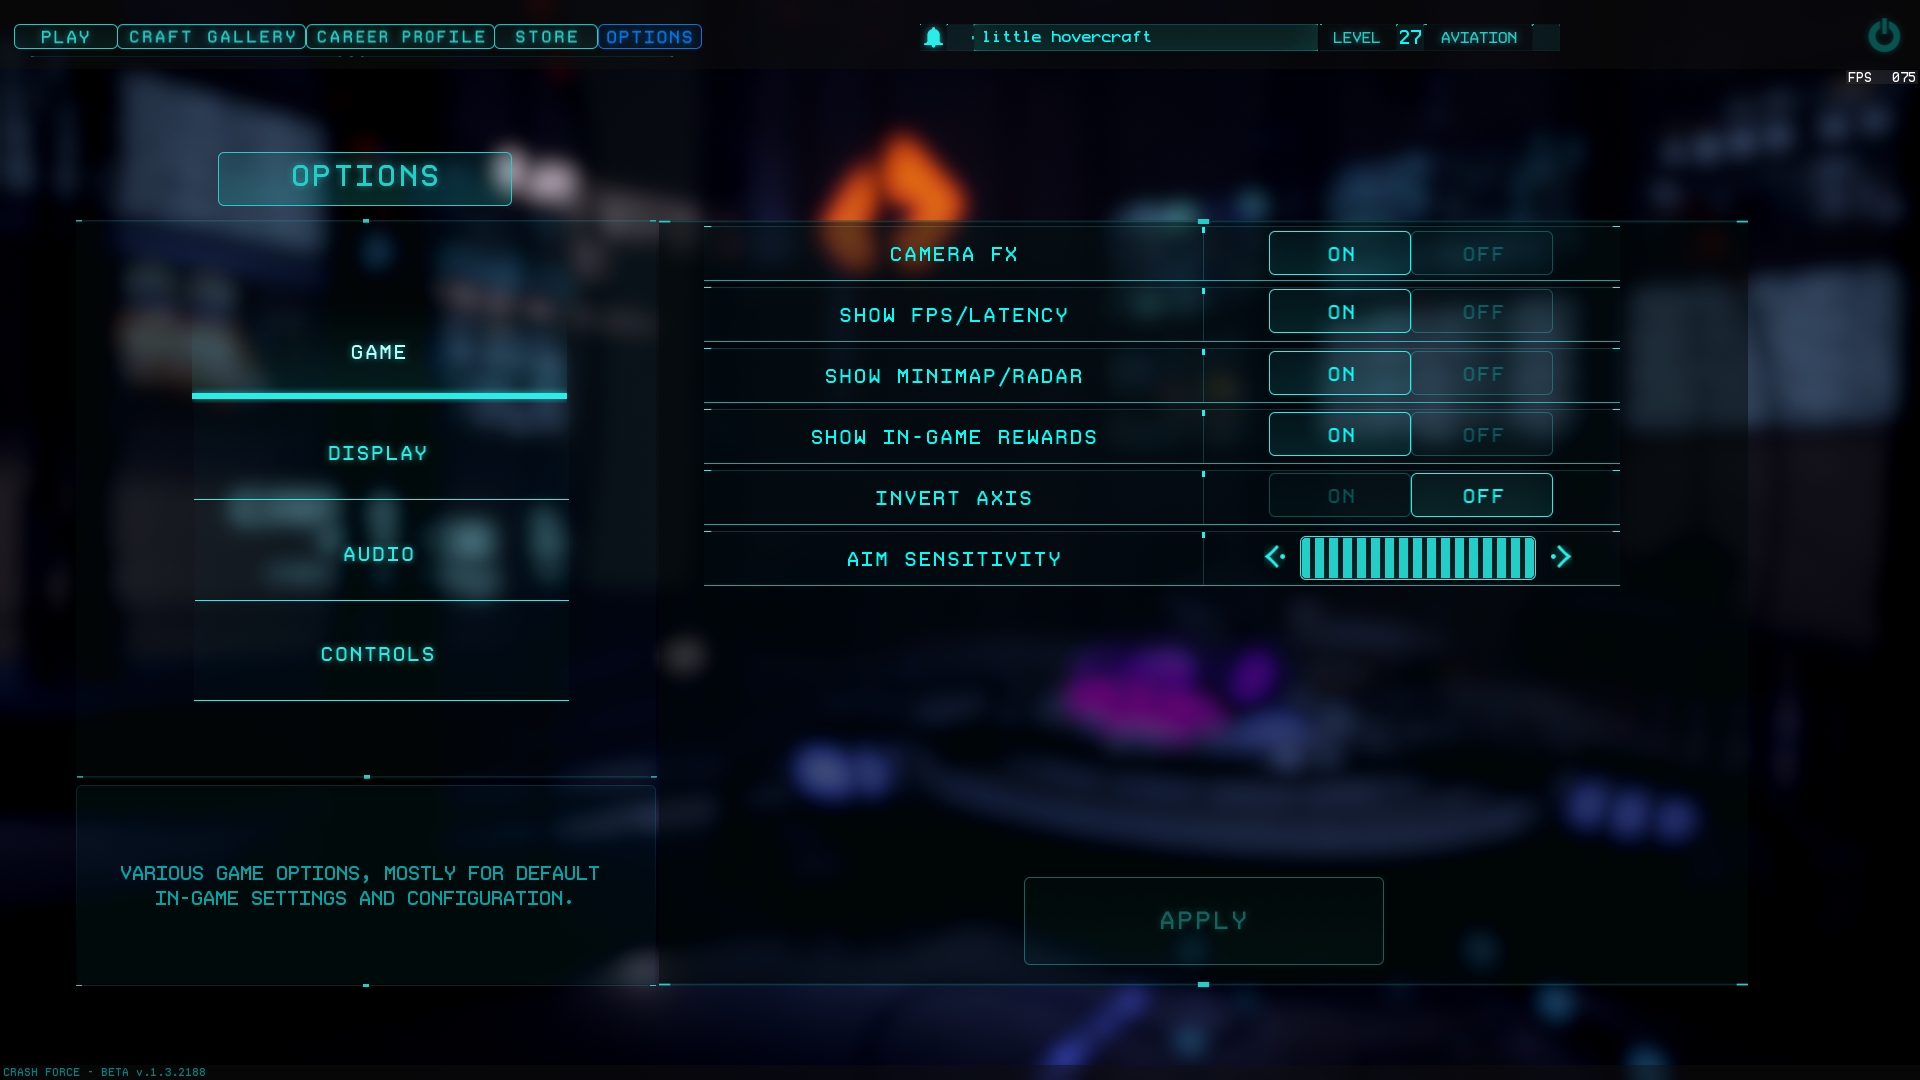 Thoughts on GUI menu layout for Hovercraft game - Creations Feedback -  Developer Forum